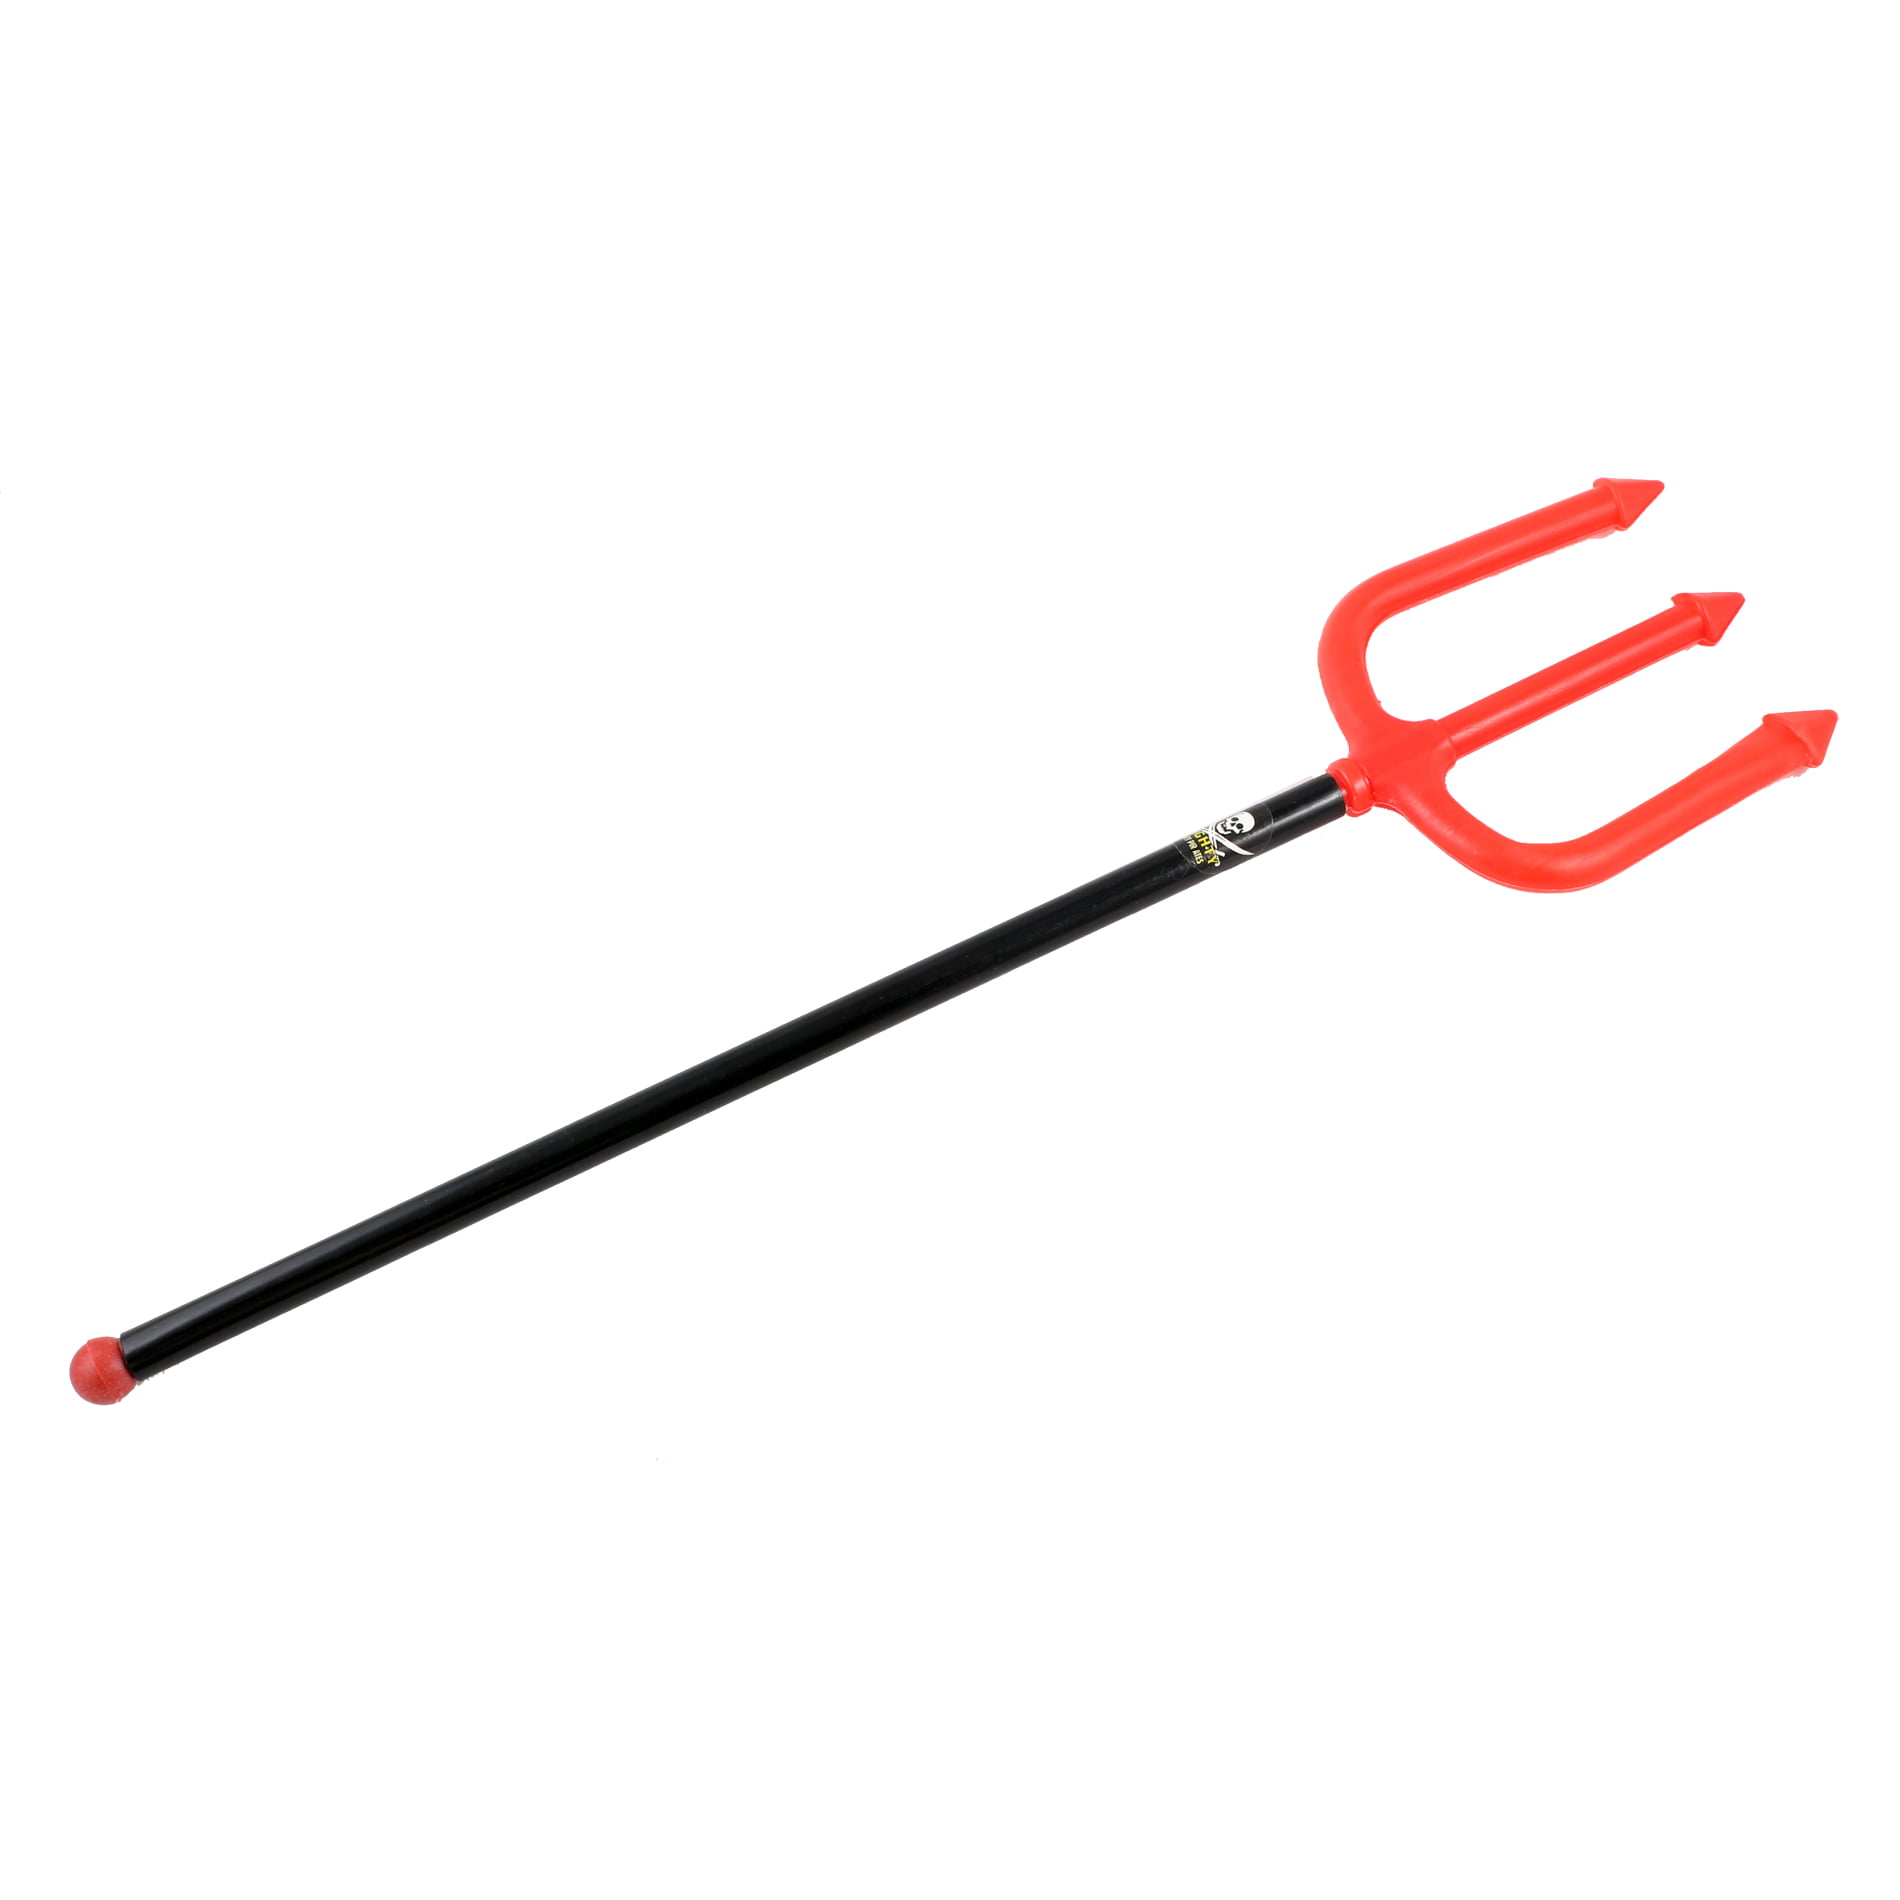 Halloween Fancy Dress Accessory for Kids and Adults Devil Costume Glittery Black and Red Devil Fork 40cm Gothic Trident for Satan Devil Pitchfork